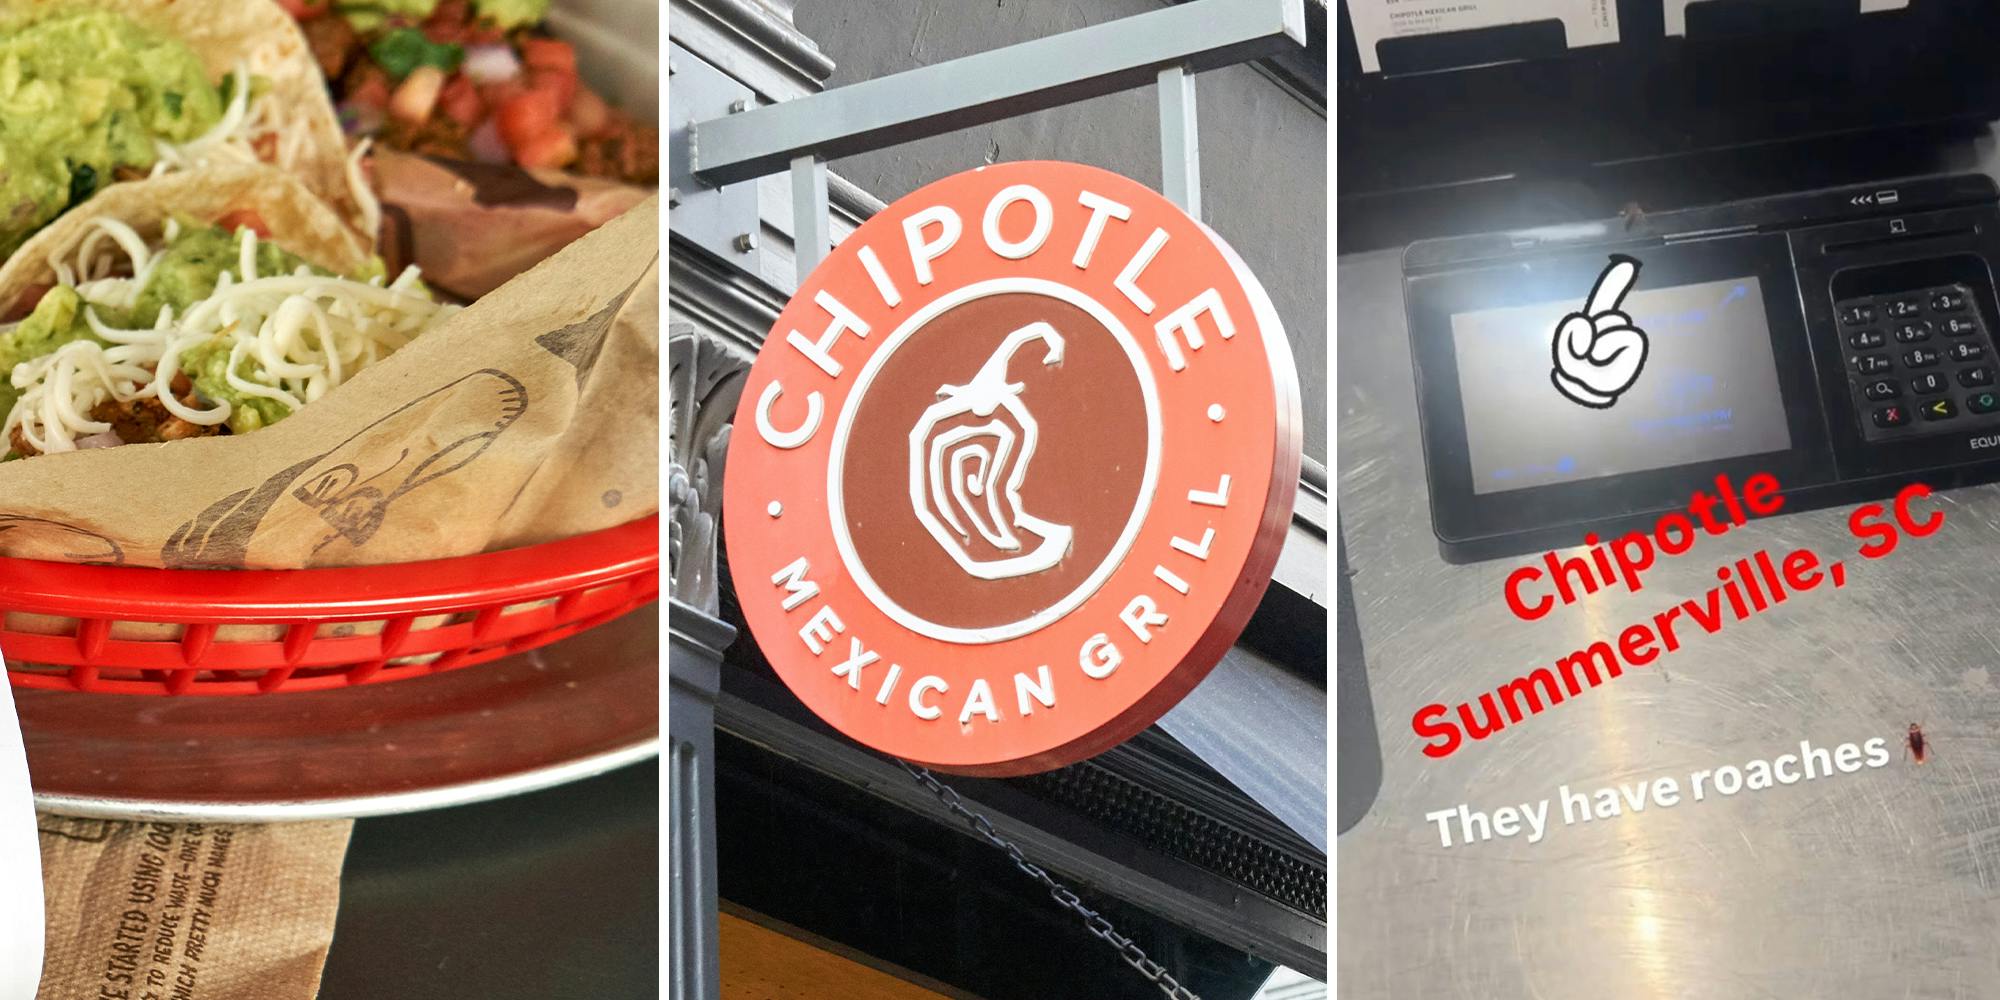 Woman gets refund for Chipotle bowl after it’s already made